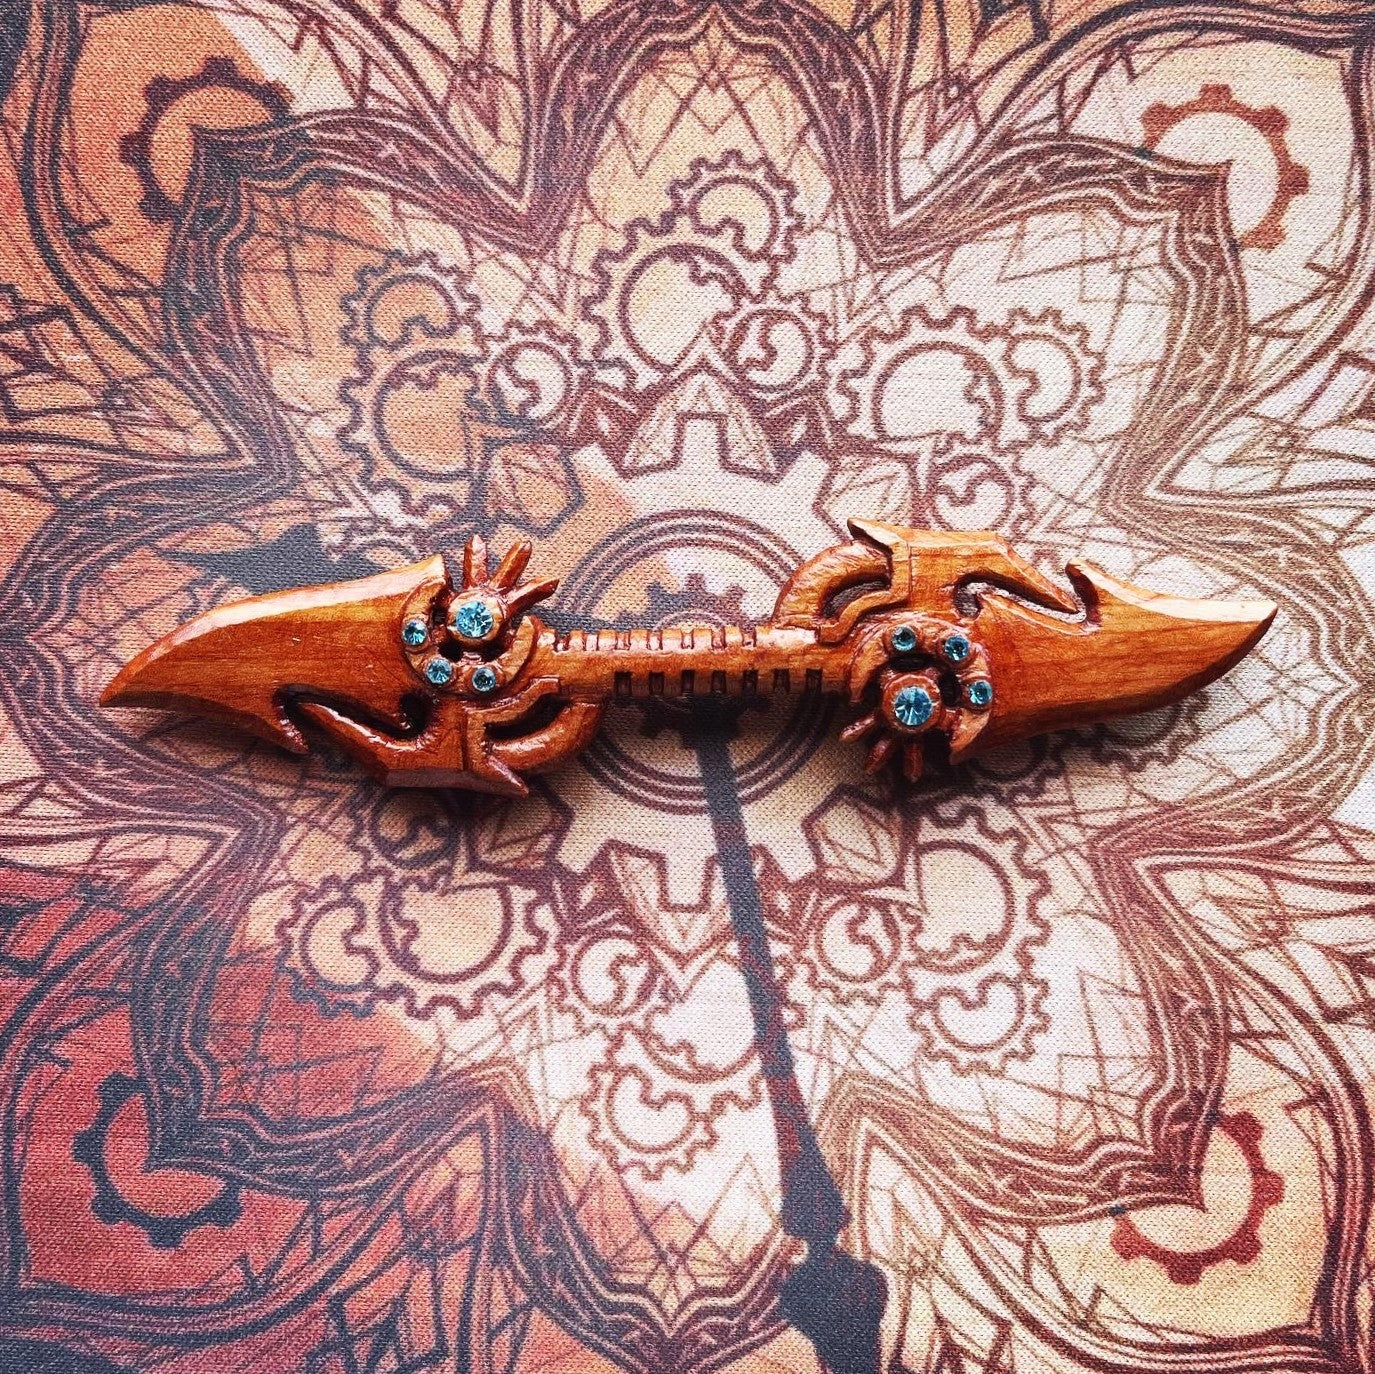 fantasy weapon art wood carving